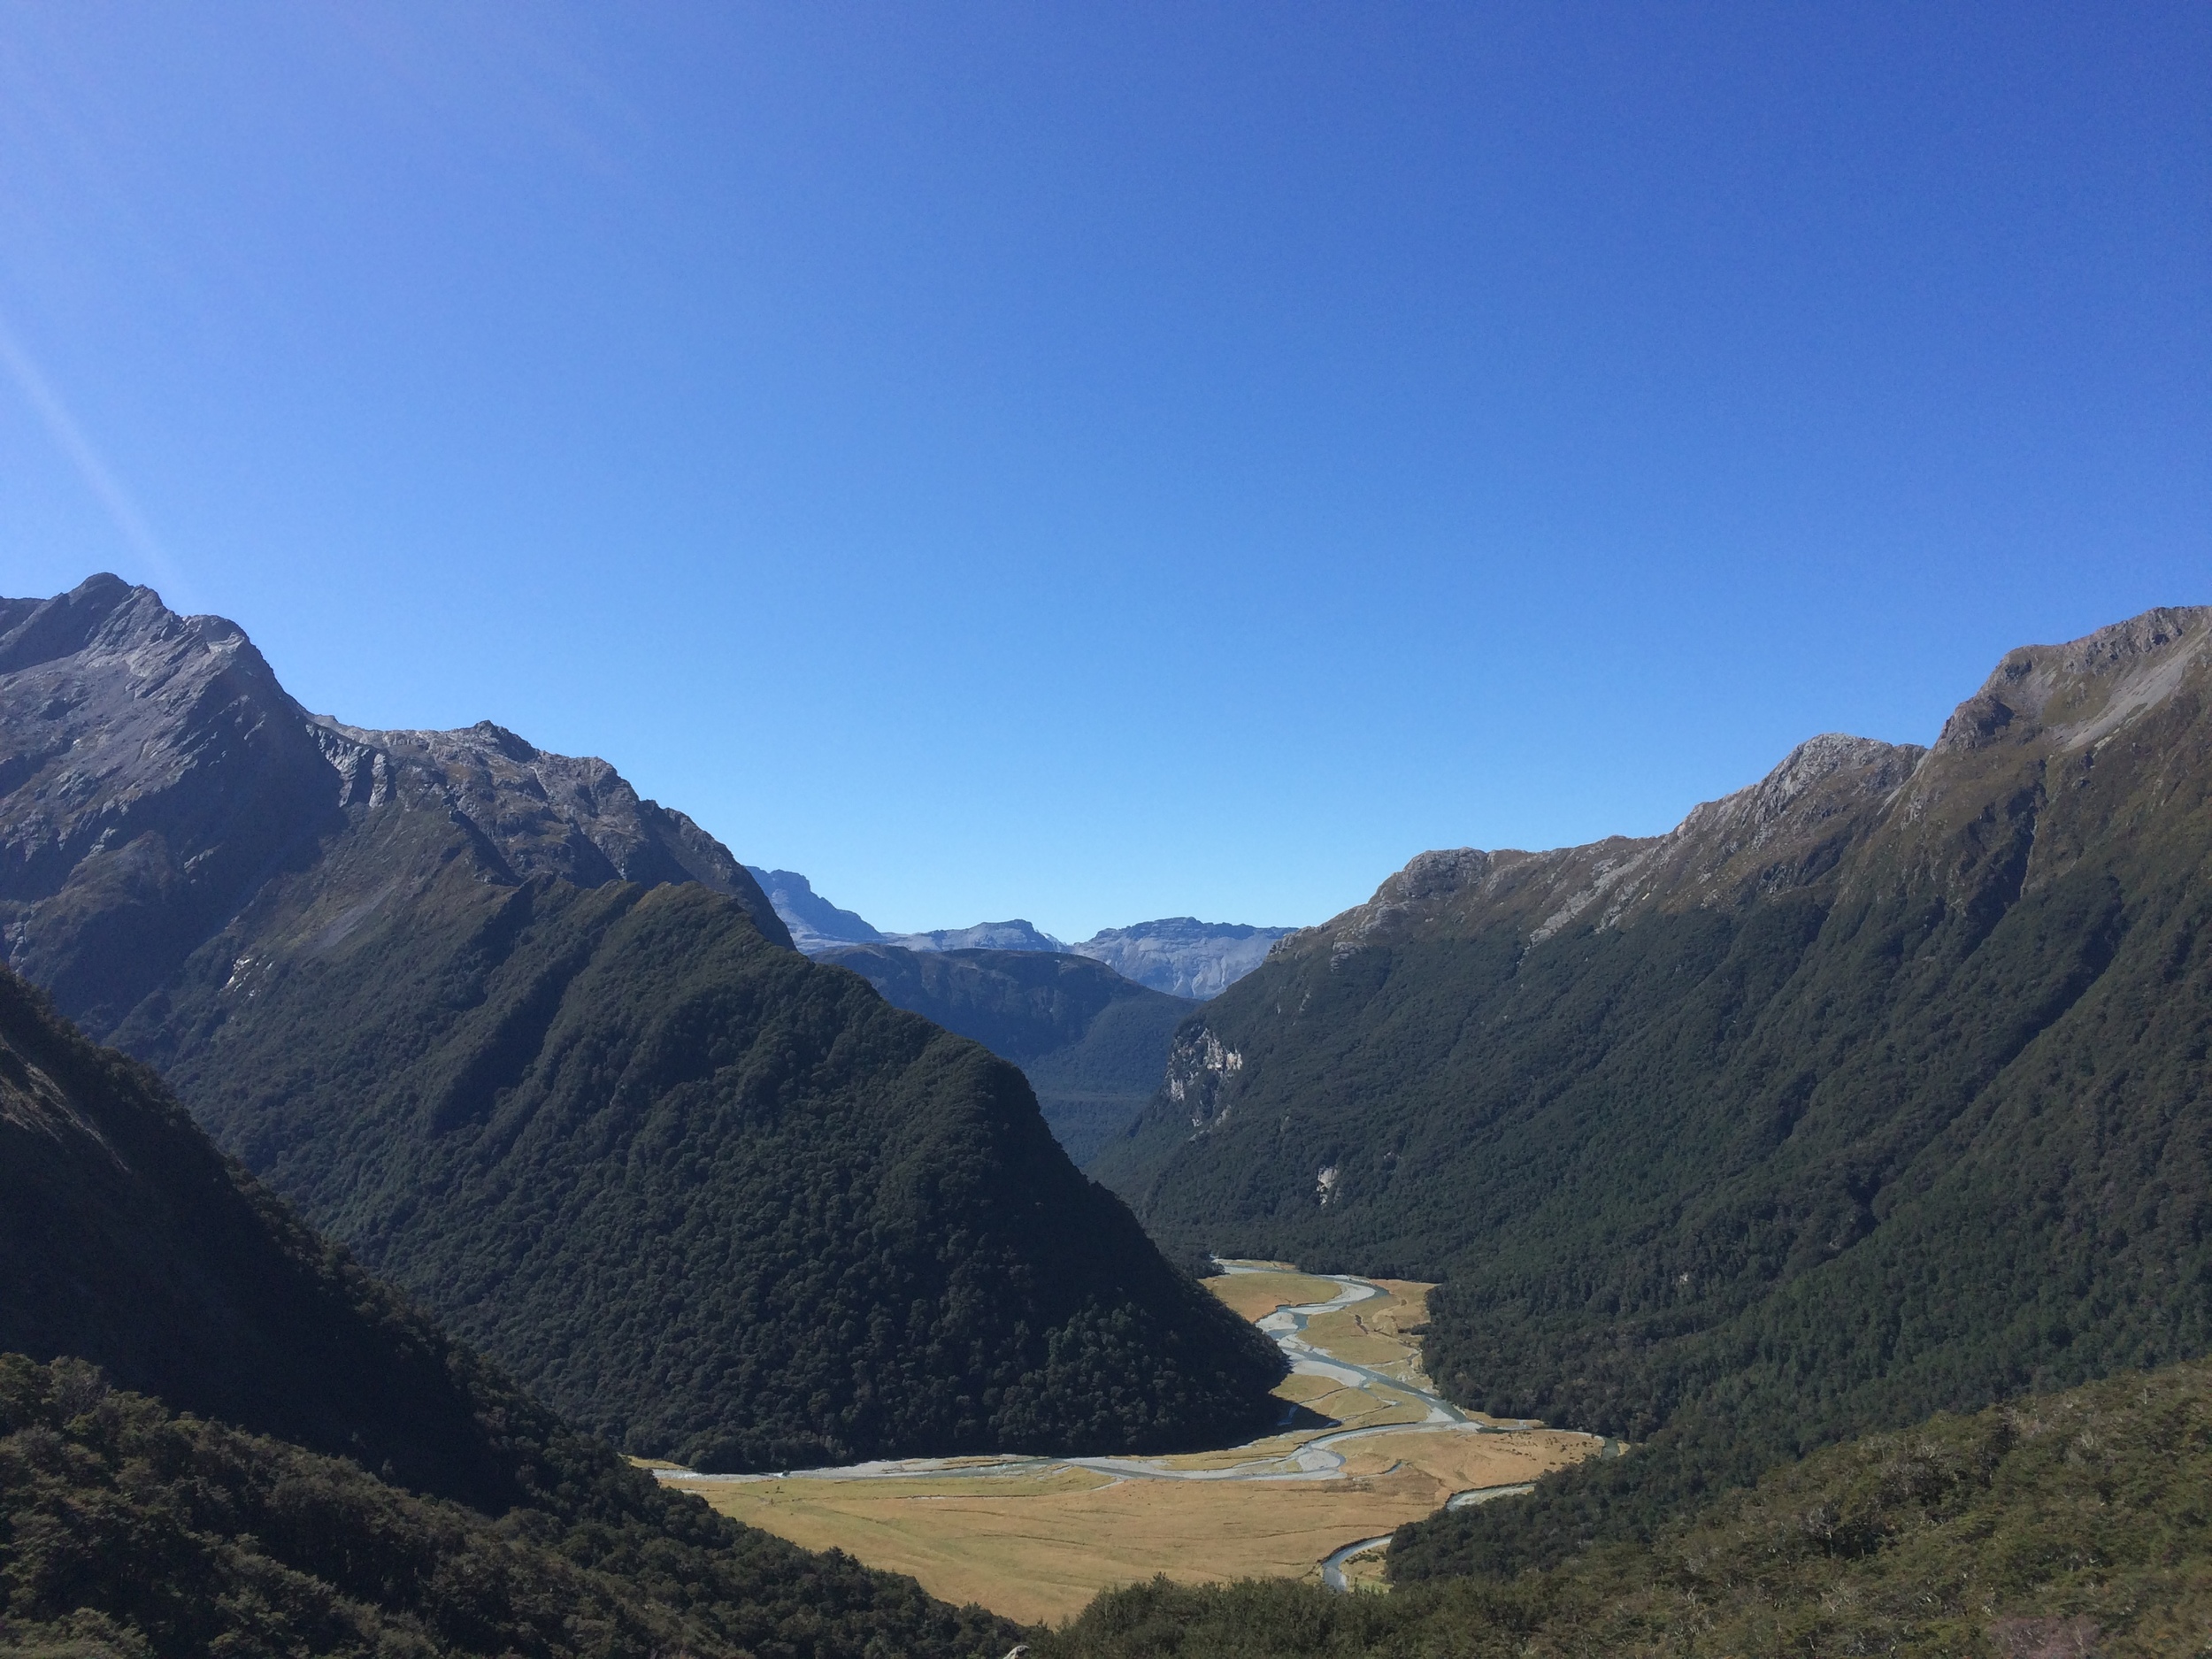 Looking down on the prairie land of the Routeburn